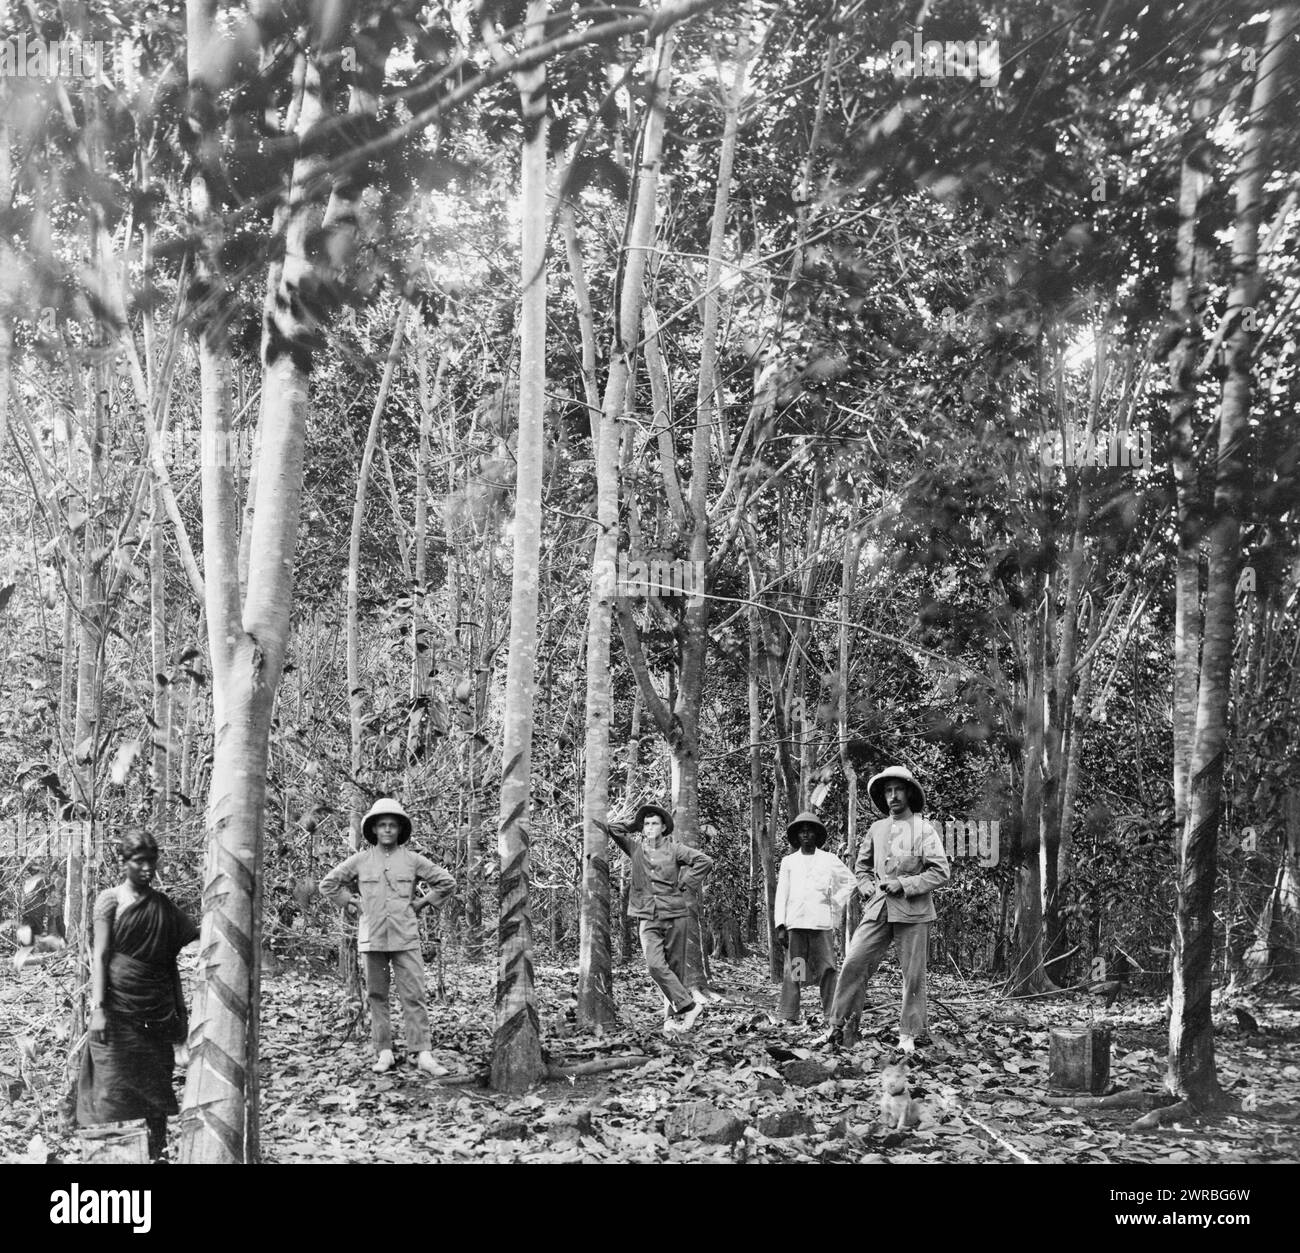 Five people among rubber trees, Singapore, between 1890 and 1923, Rubber trees, Singapore, 1890-1930, Photographic prints, 1890-1930., Photographic prints, 1890-1930, 1 photographic print Stock Photo